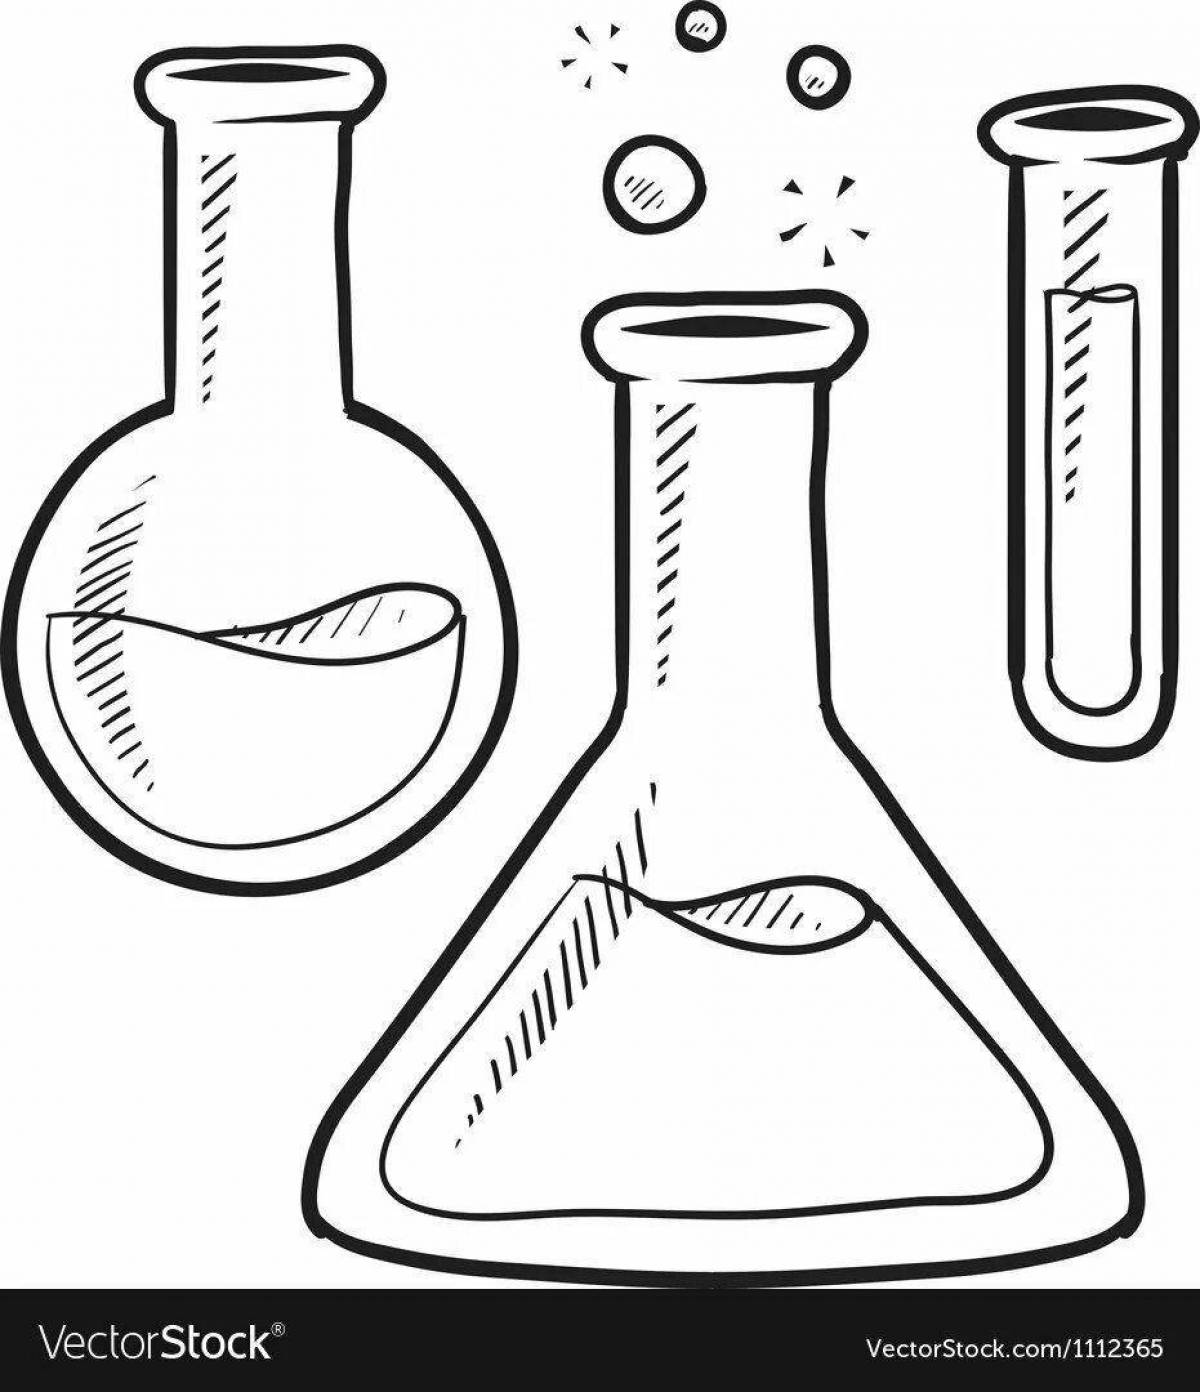 Colourful chemical flasks coloring book